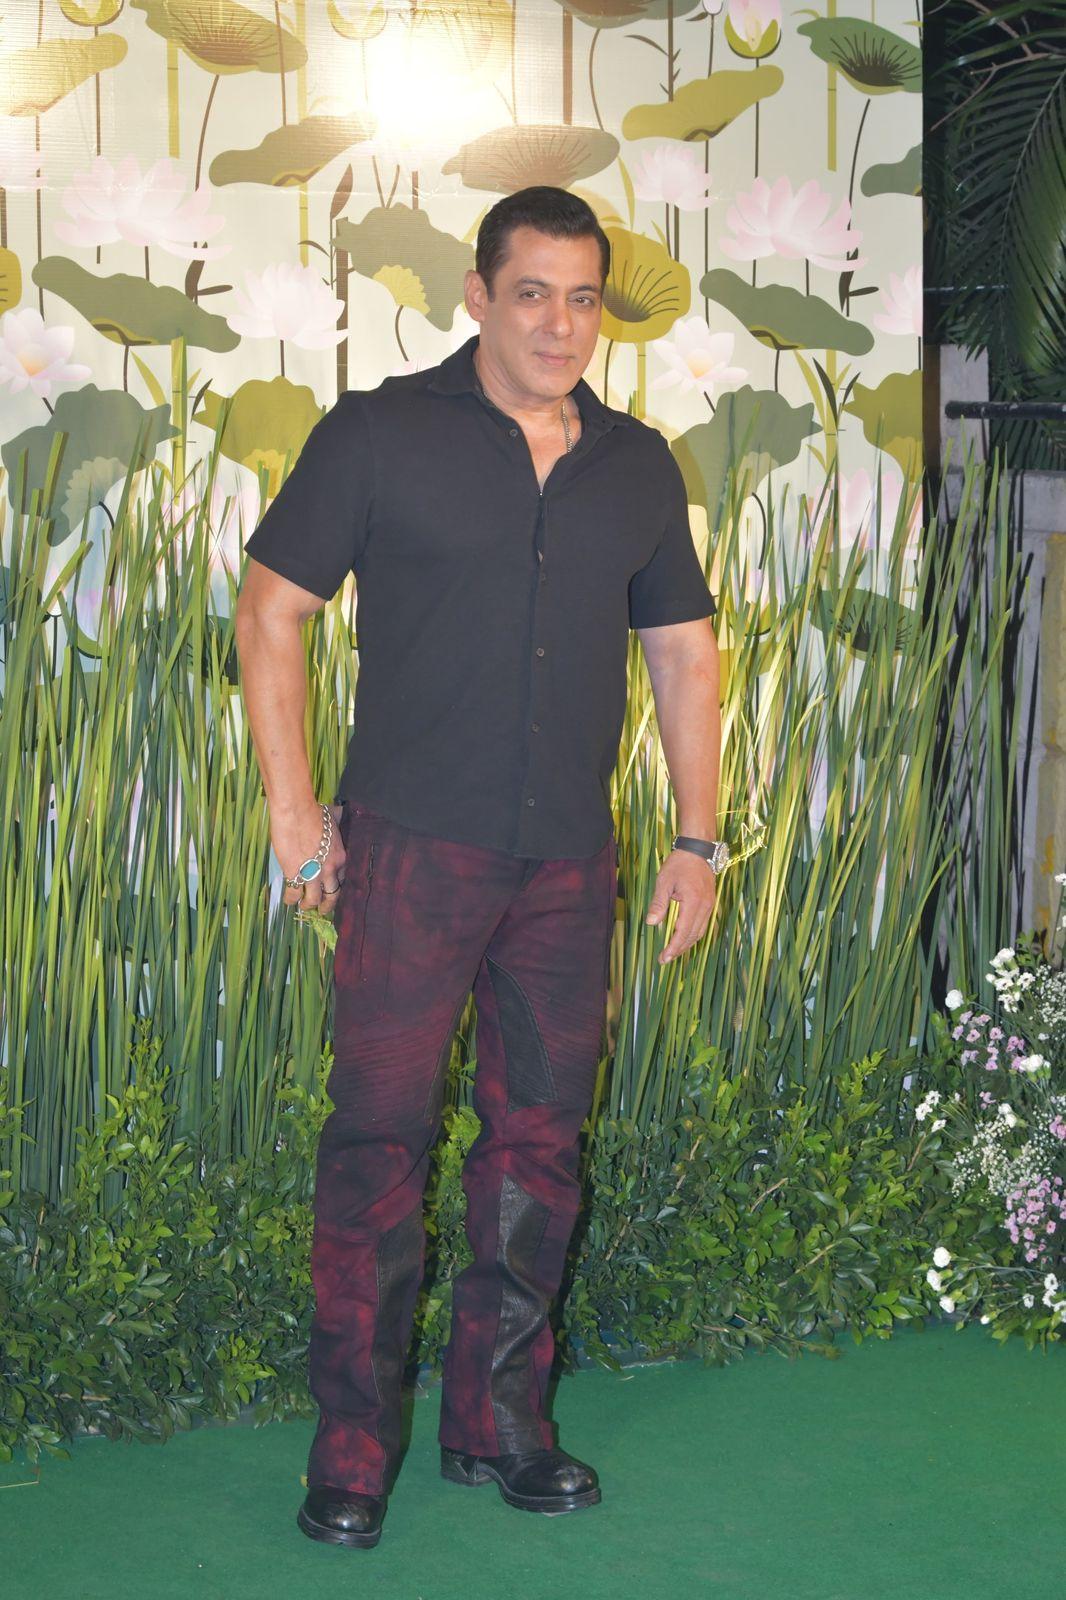 For the occasion, Salman Khan wore jeans and a black shirt